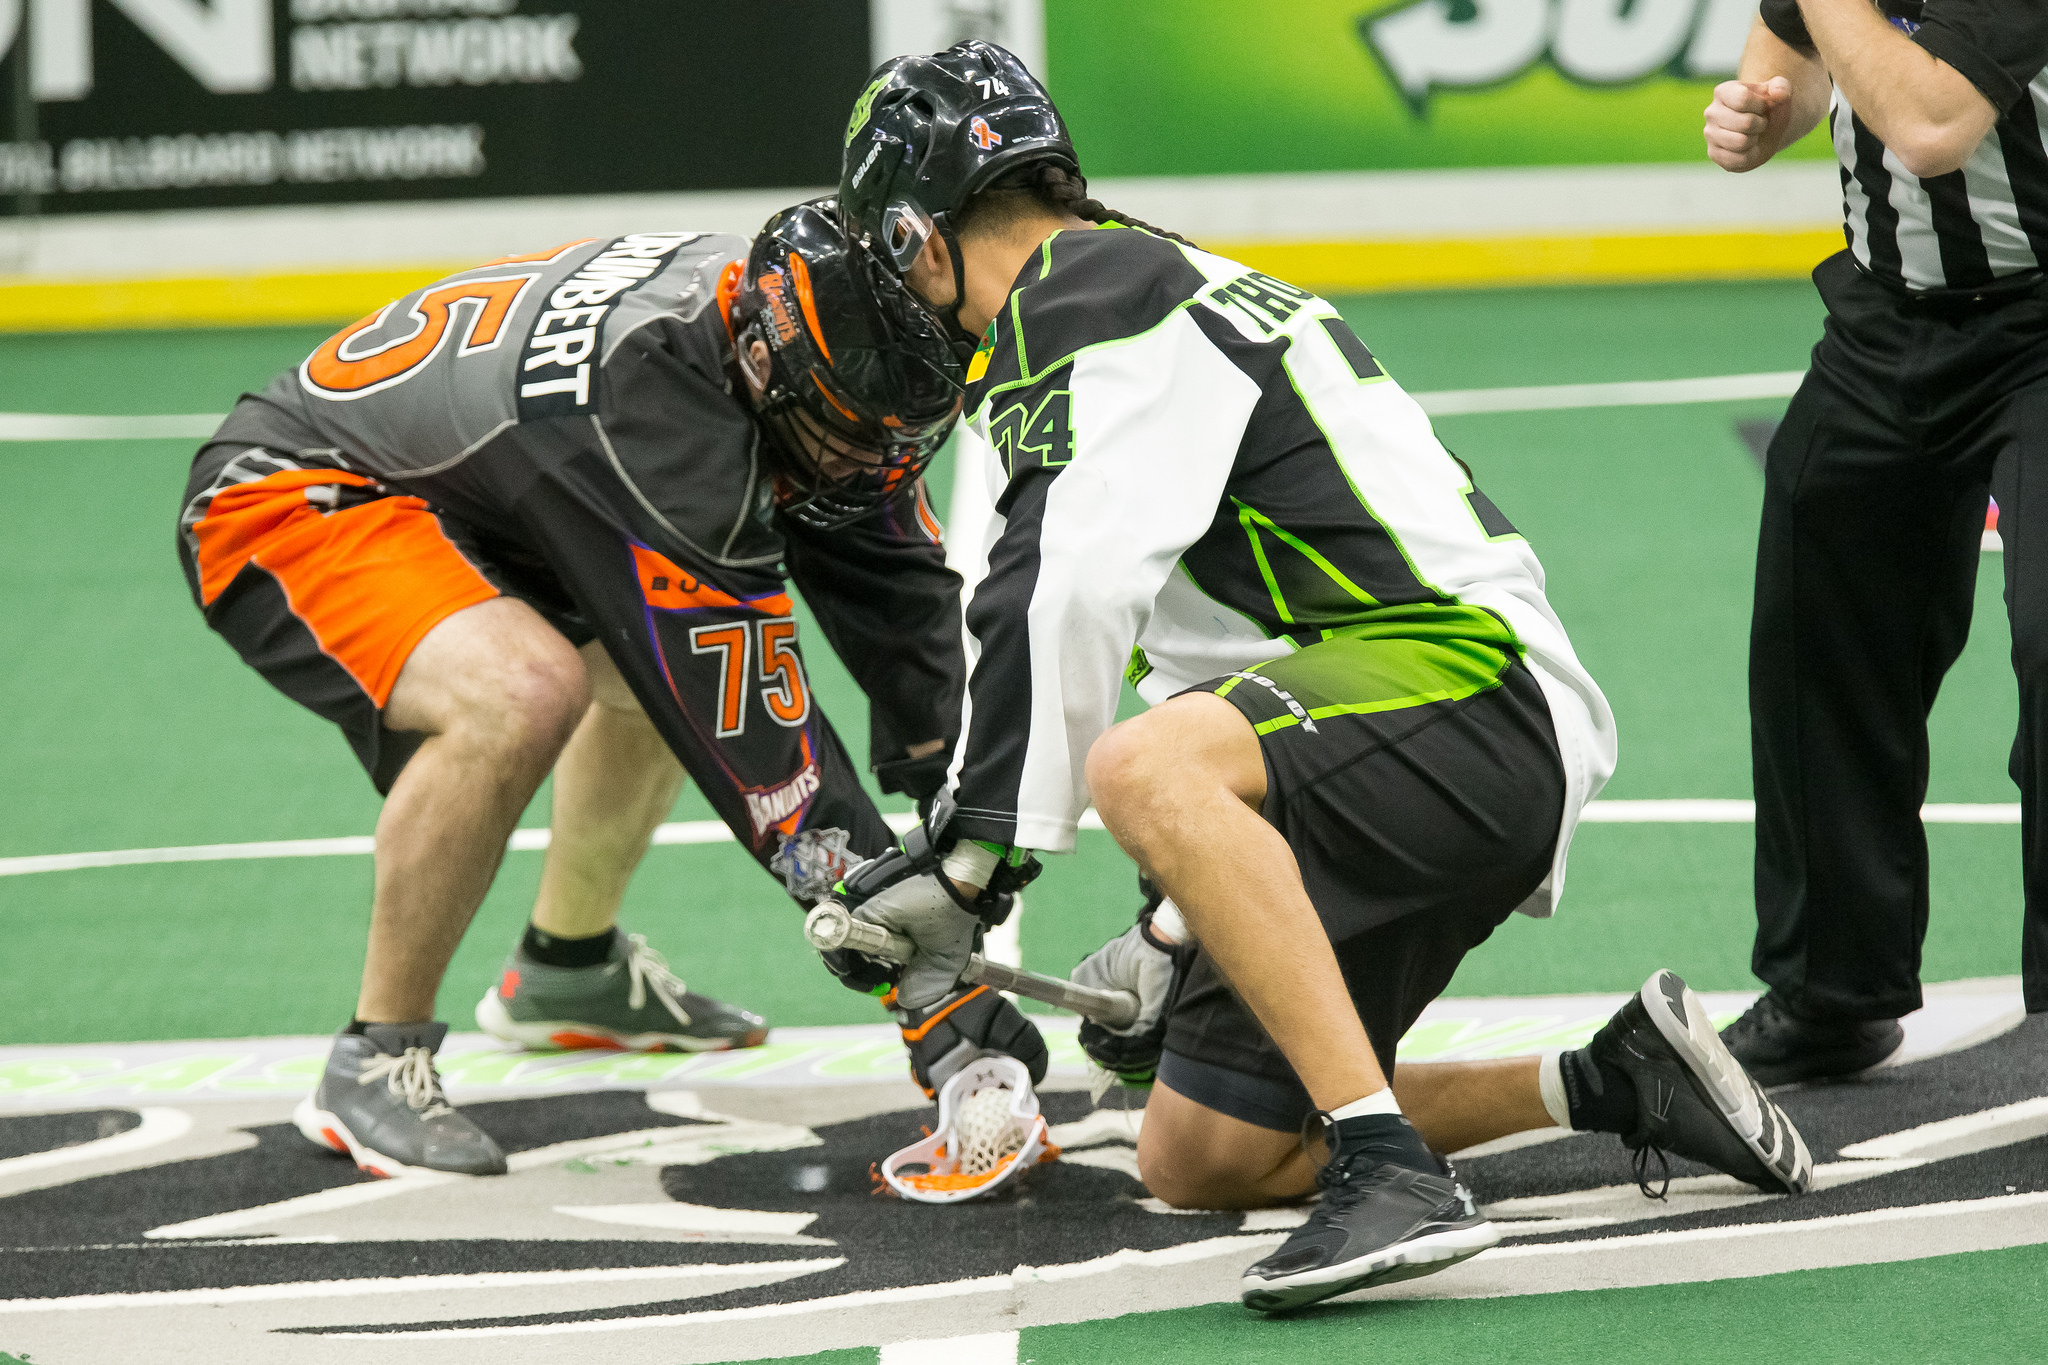 Tsn Delivers Exclusive Live Coverage Of The Nll ChampionS Cup Finals